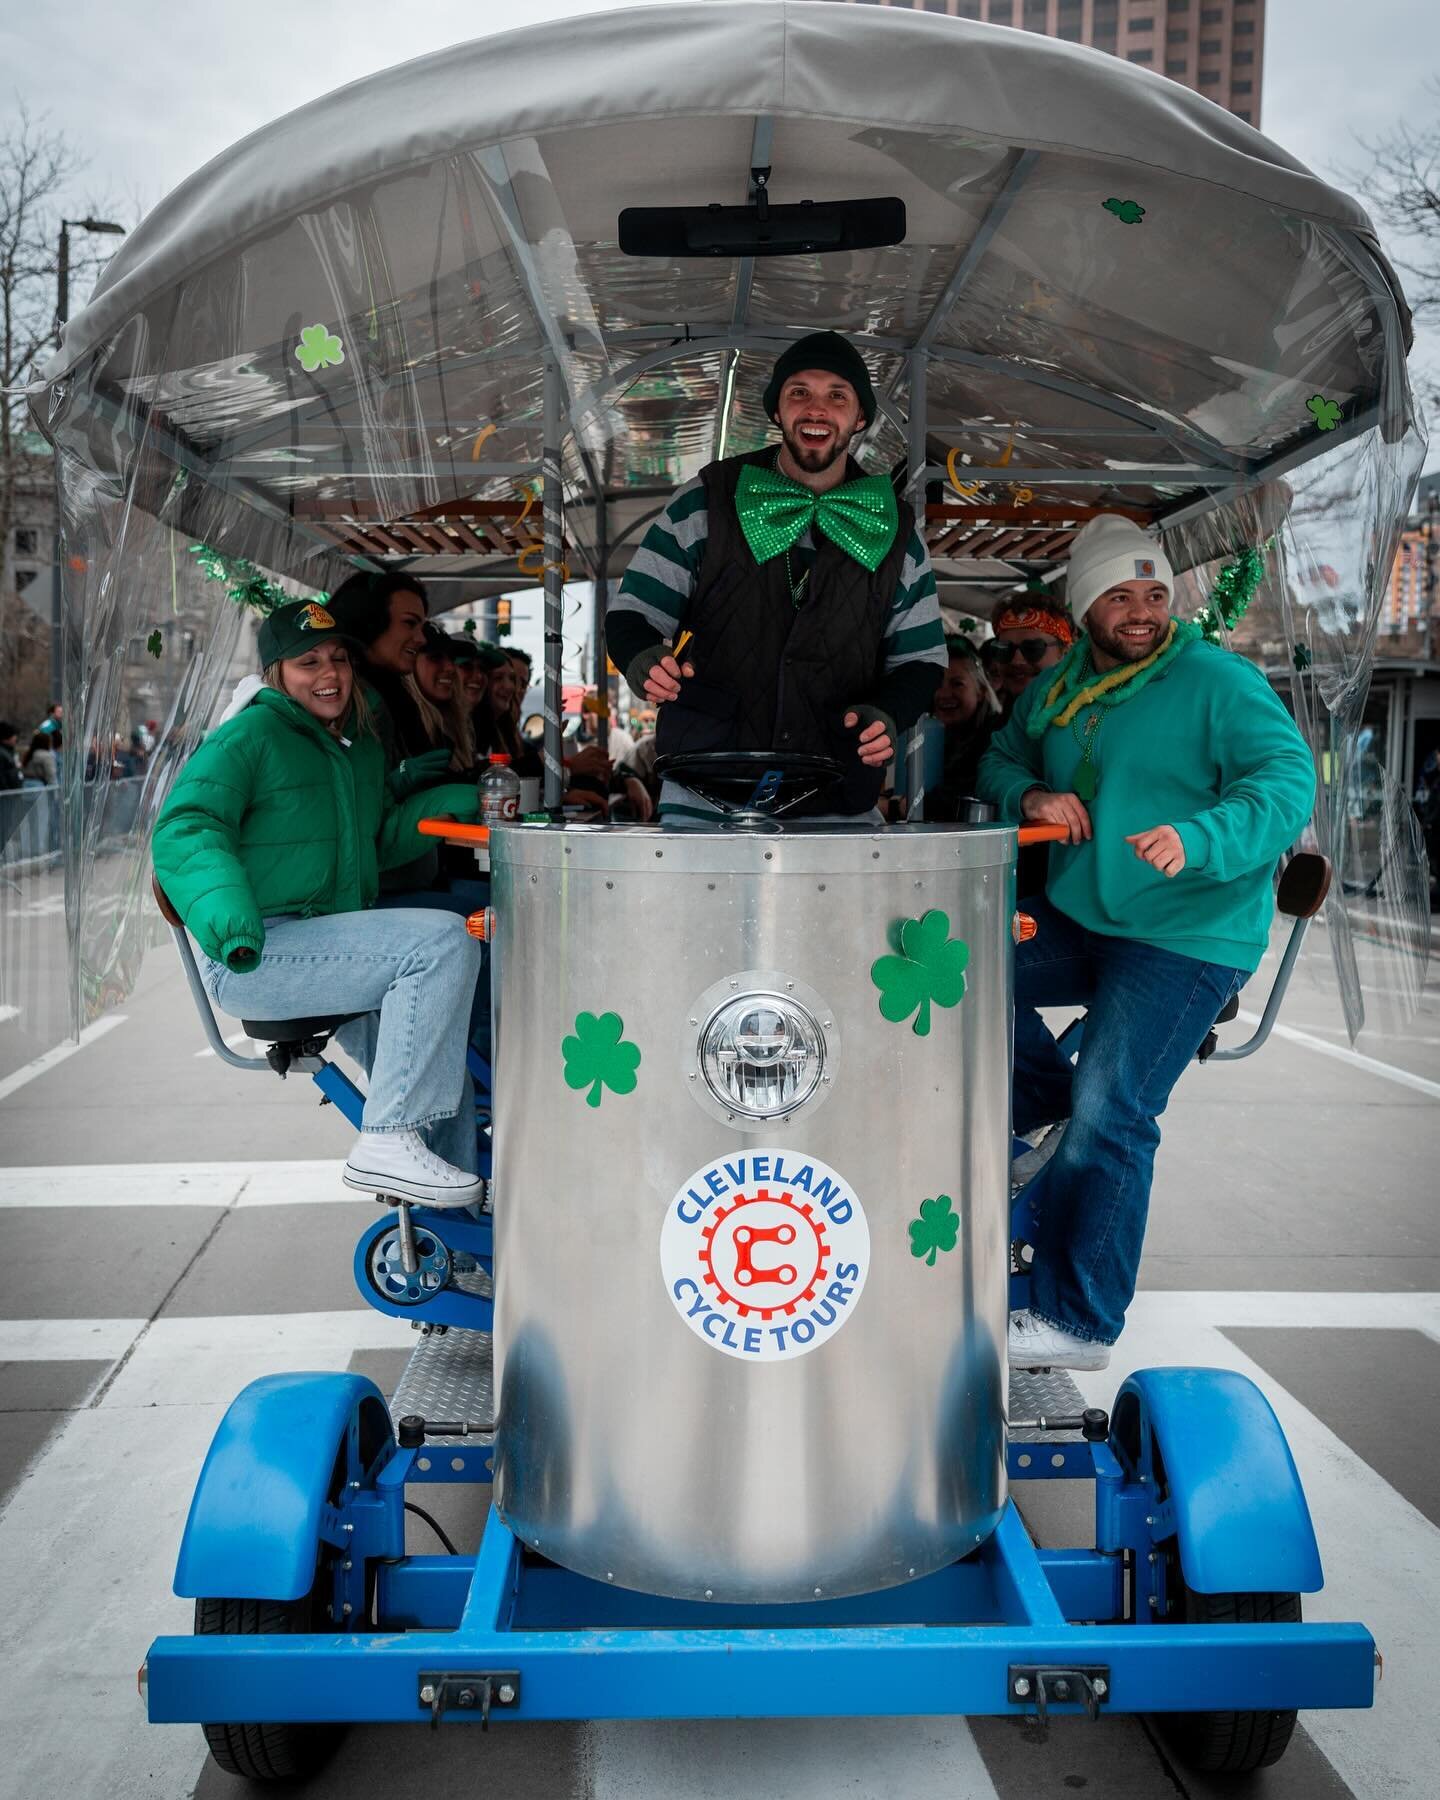 Sham-rocking our way through the St. Patrick&rsquo;s Day parade with Cleveland Cycle Tours! 🍀🌈 Who needs a pot of gold when you&rsquo;ve got pedal power and plenty of Irish spirit? Cheers to a wheel-y good time and endless shenanigans! 

📸 Photos 